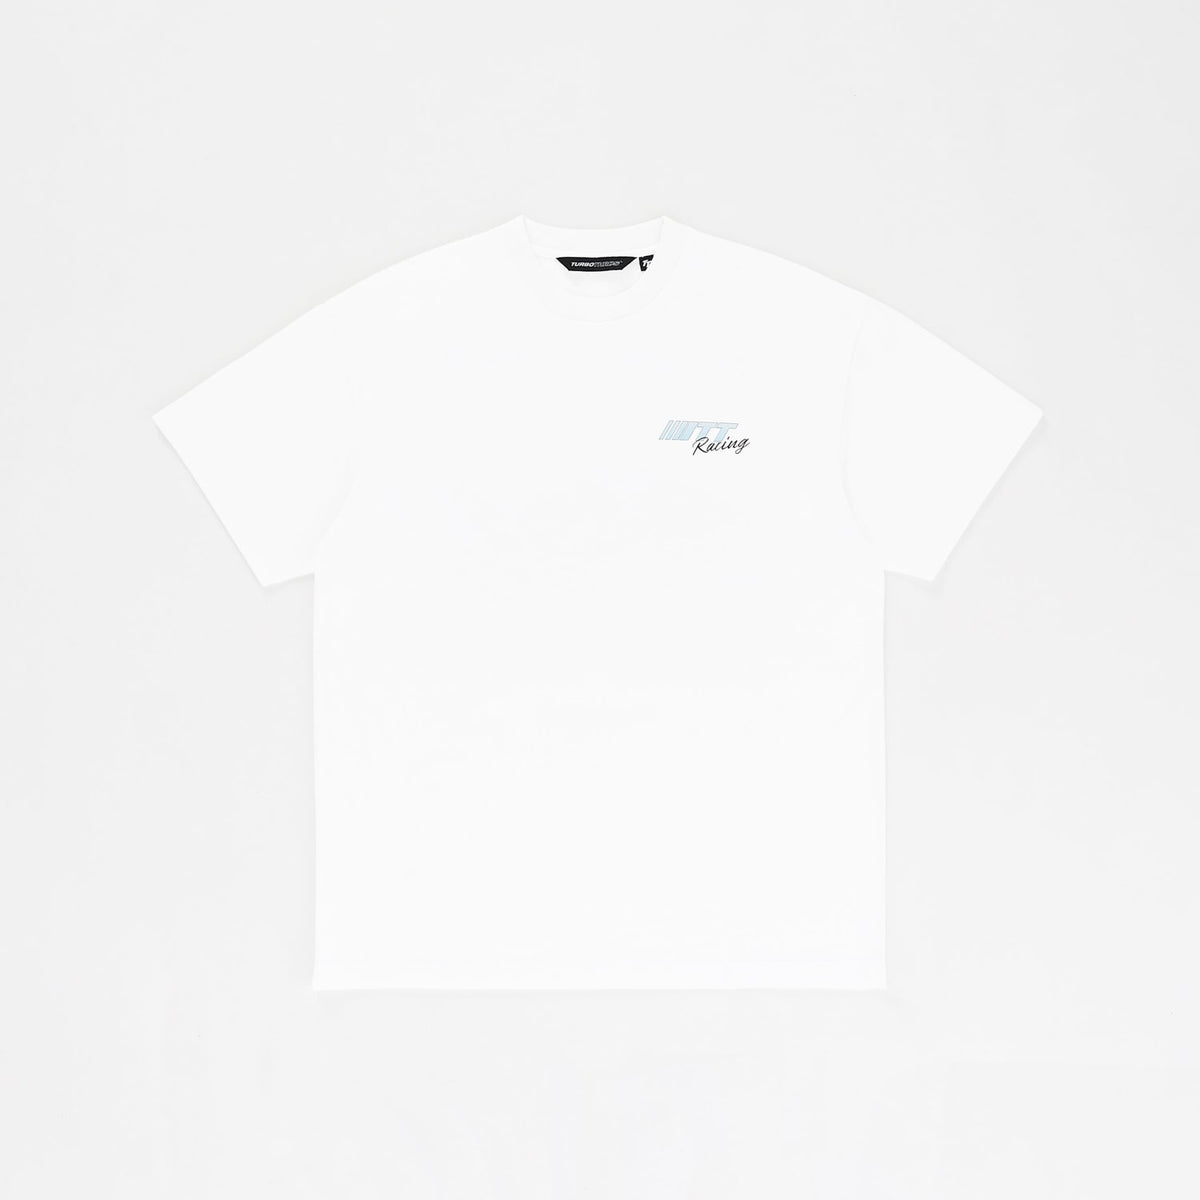 CLK GTR Relaxed Fit Tee White